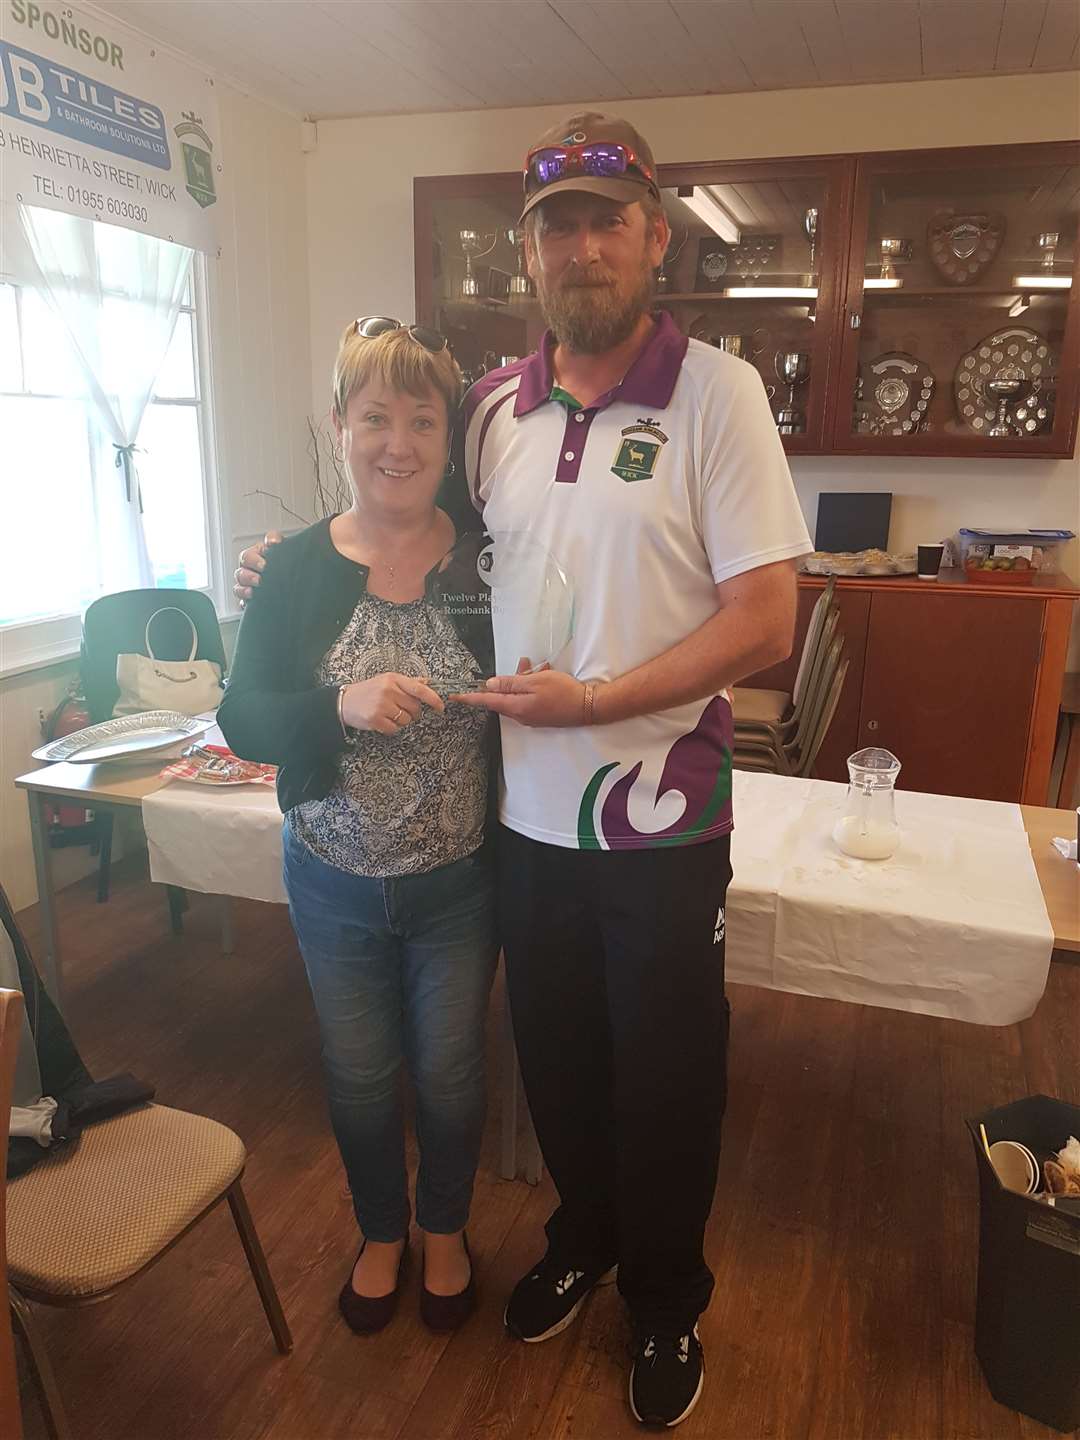 Sharon Rosie presenting the 12 Player Challenge trophy to Paul Mackinnon on behalf of the sponsor.